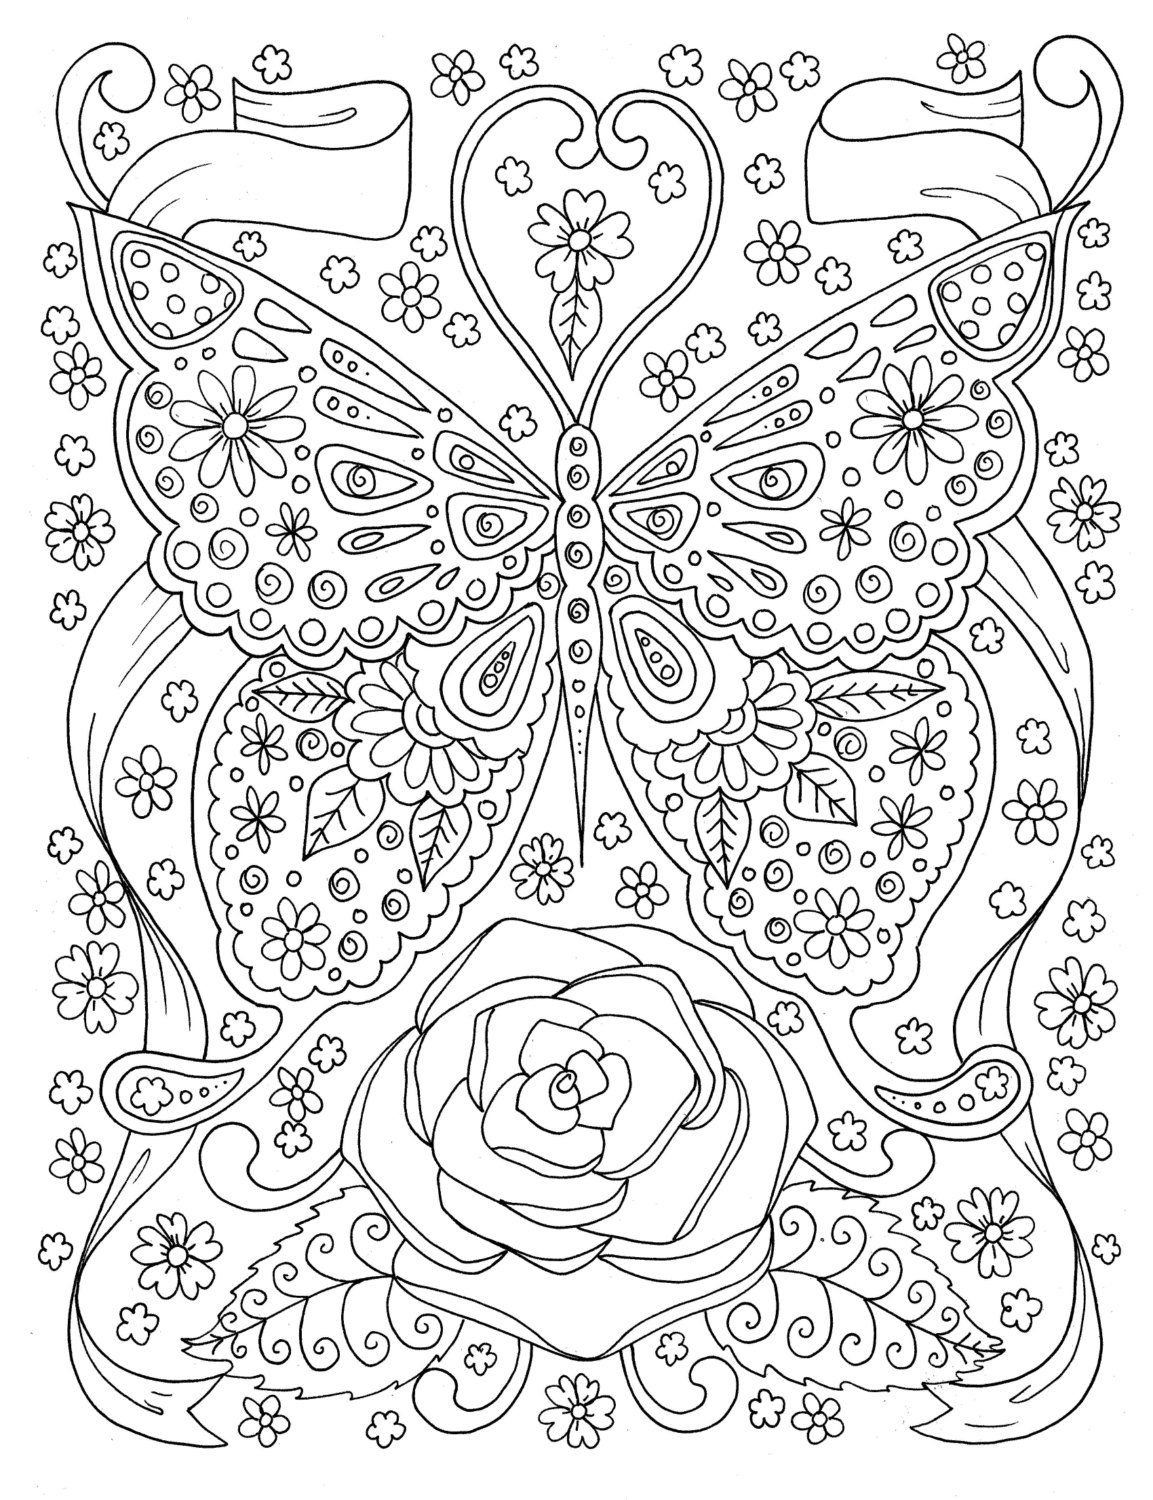 Digital Coloring Pages For Adults at GetColorings.com | Free printable